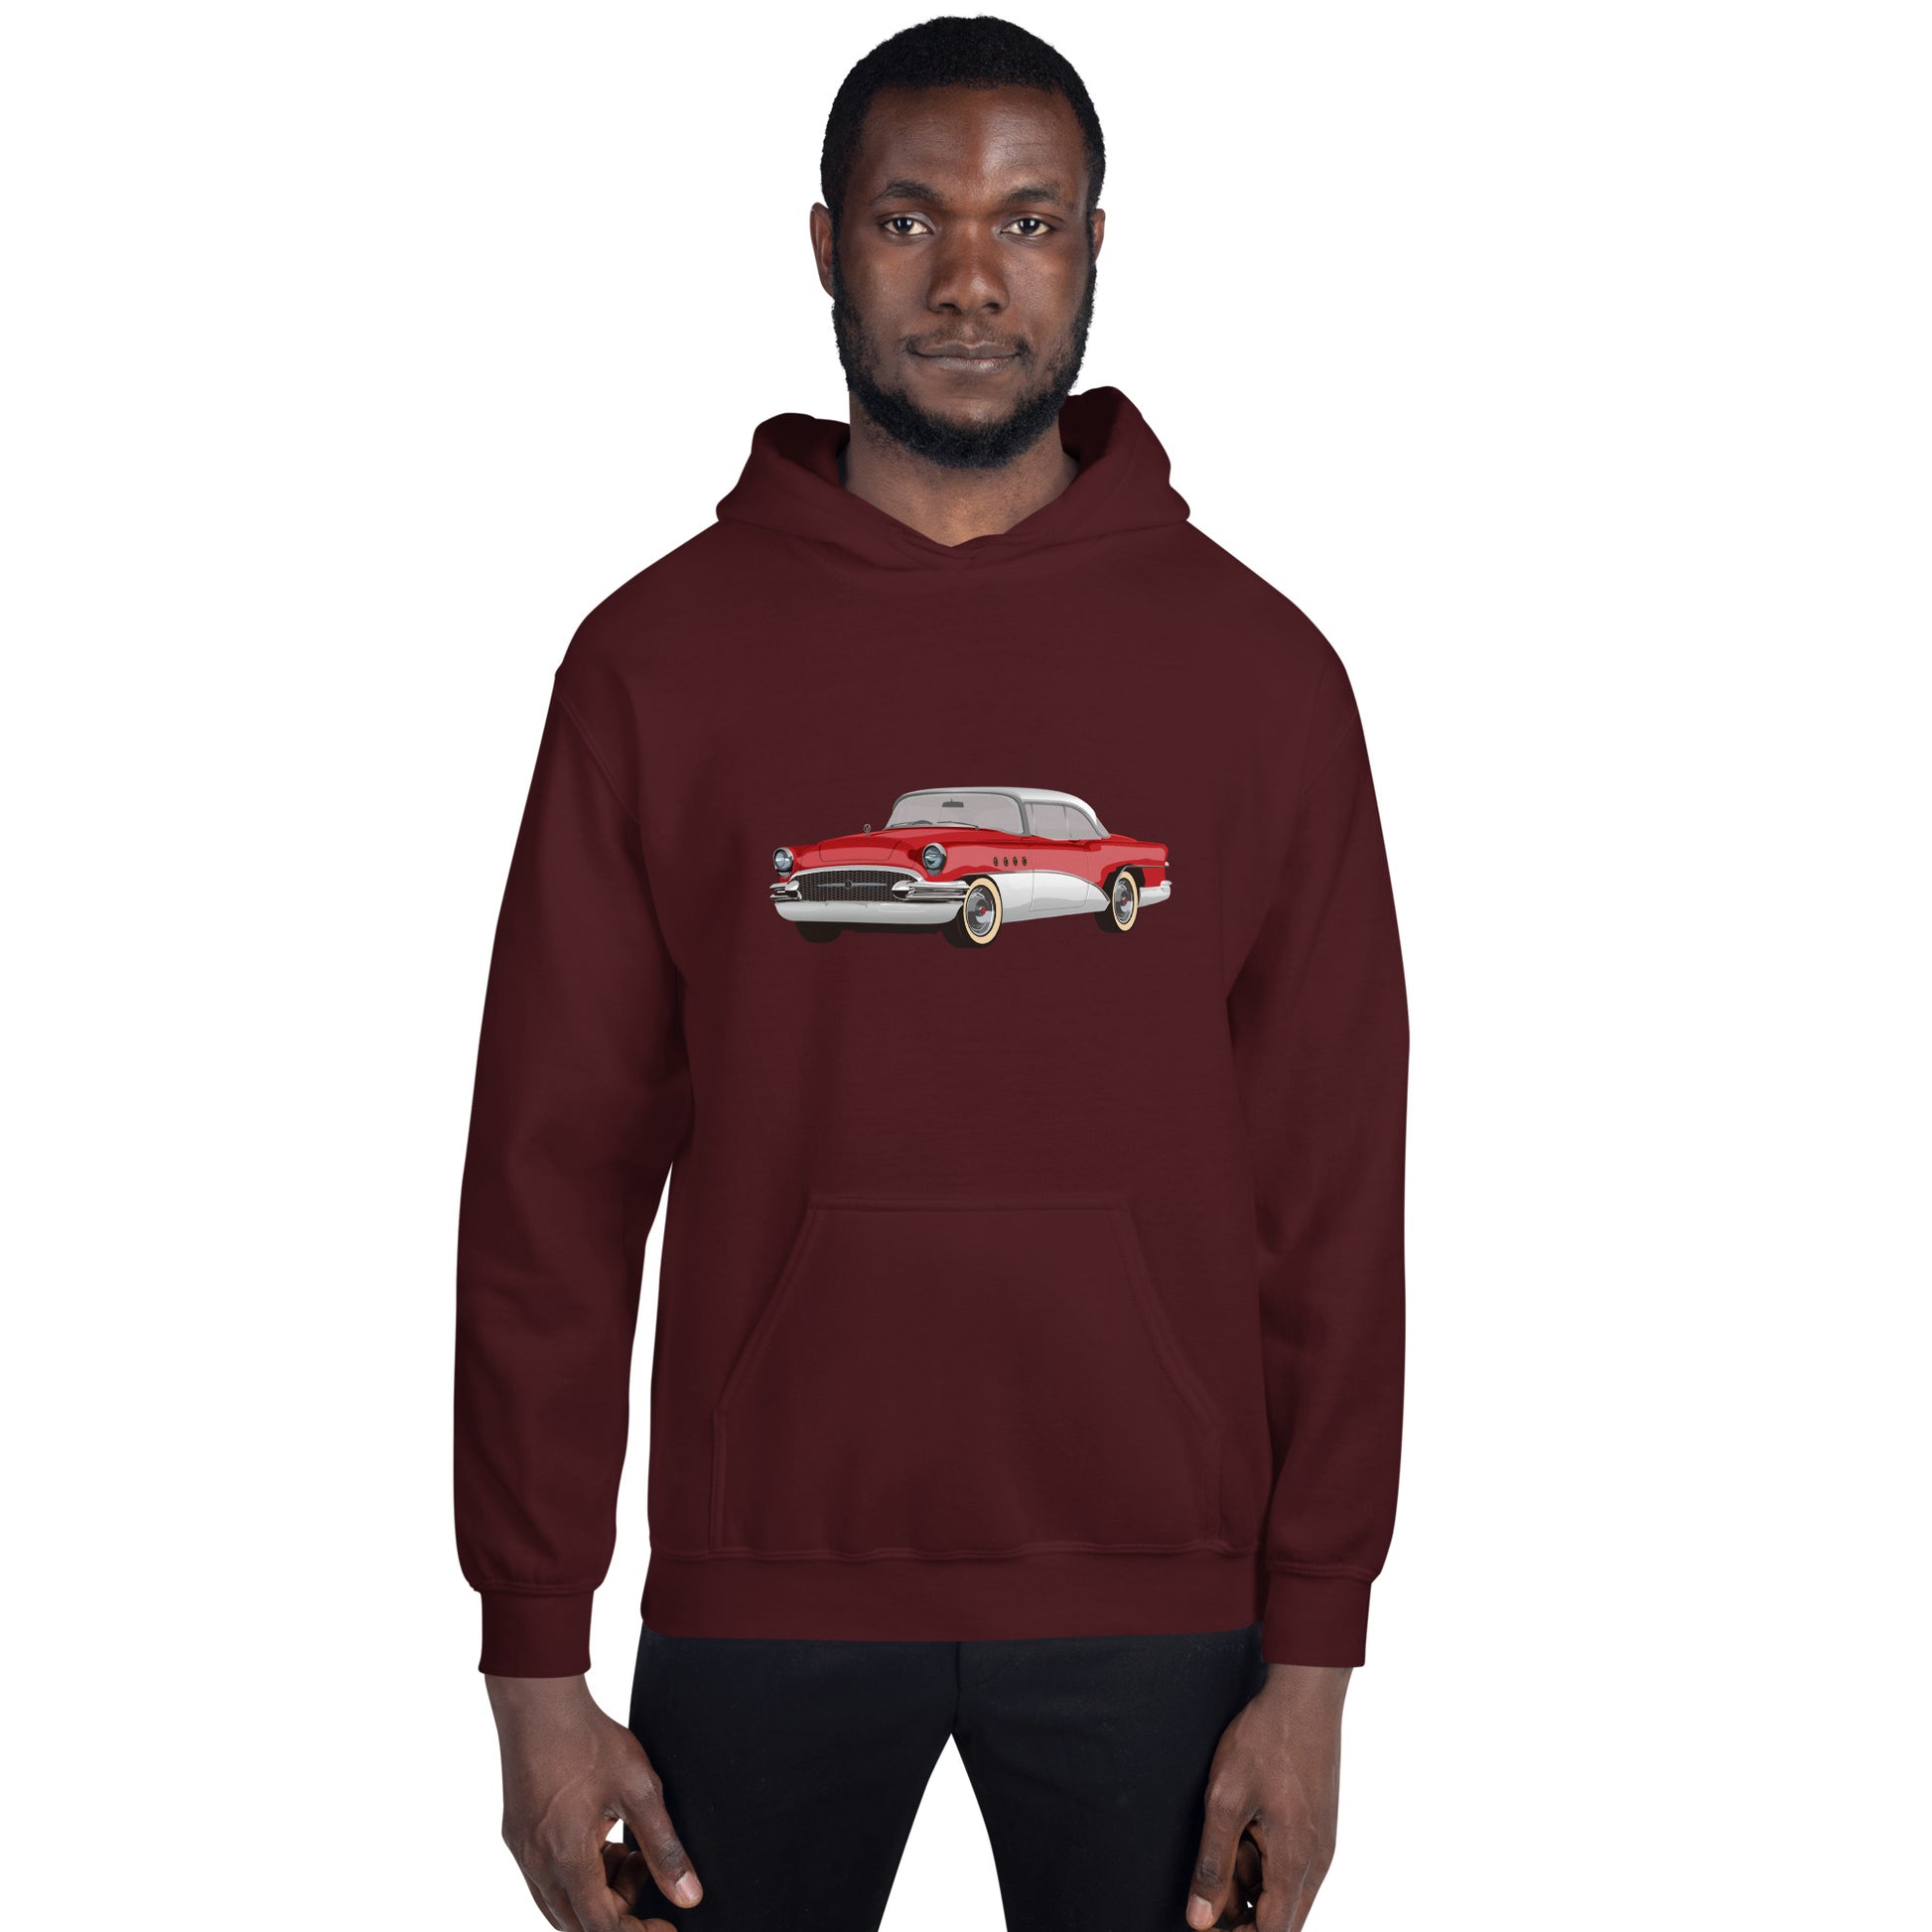 Man with maroon hoodie with red chevrolet